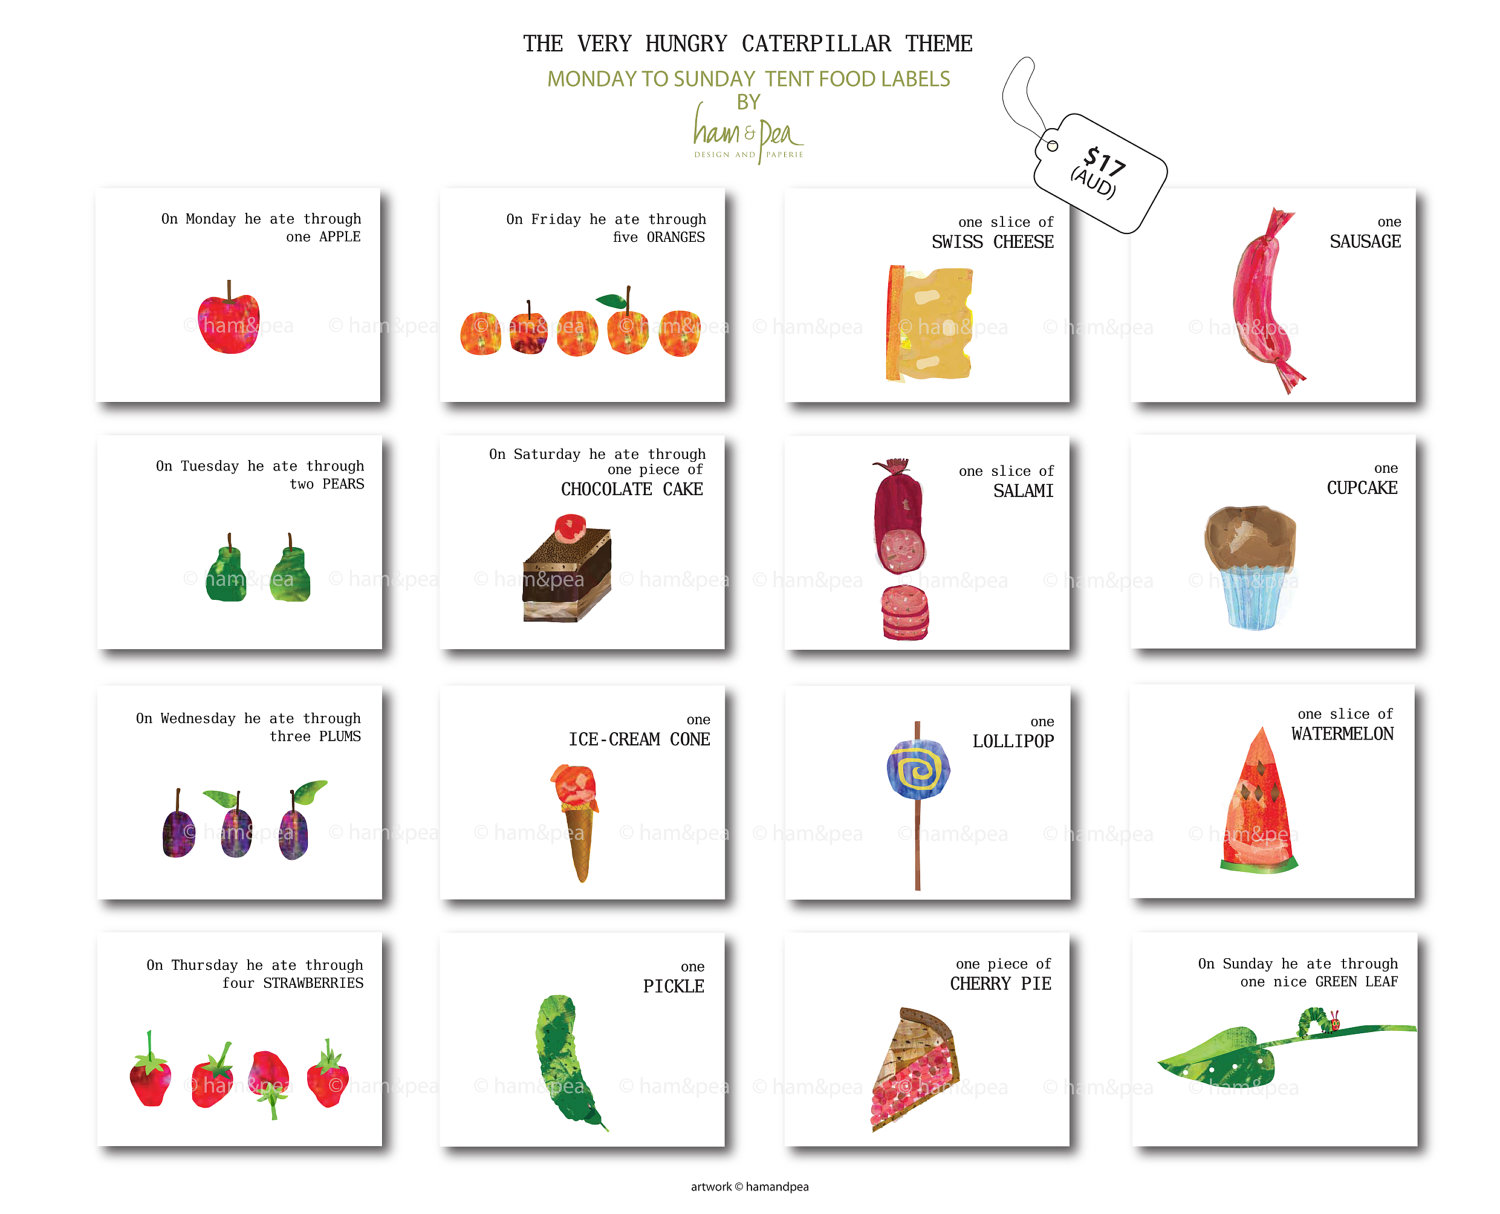 5-best-images-of-the-very-hungry-caterpillar-printables-very-hungry-caterpillar-printables